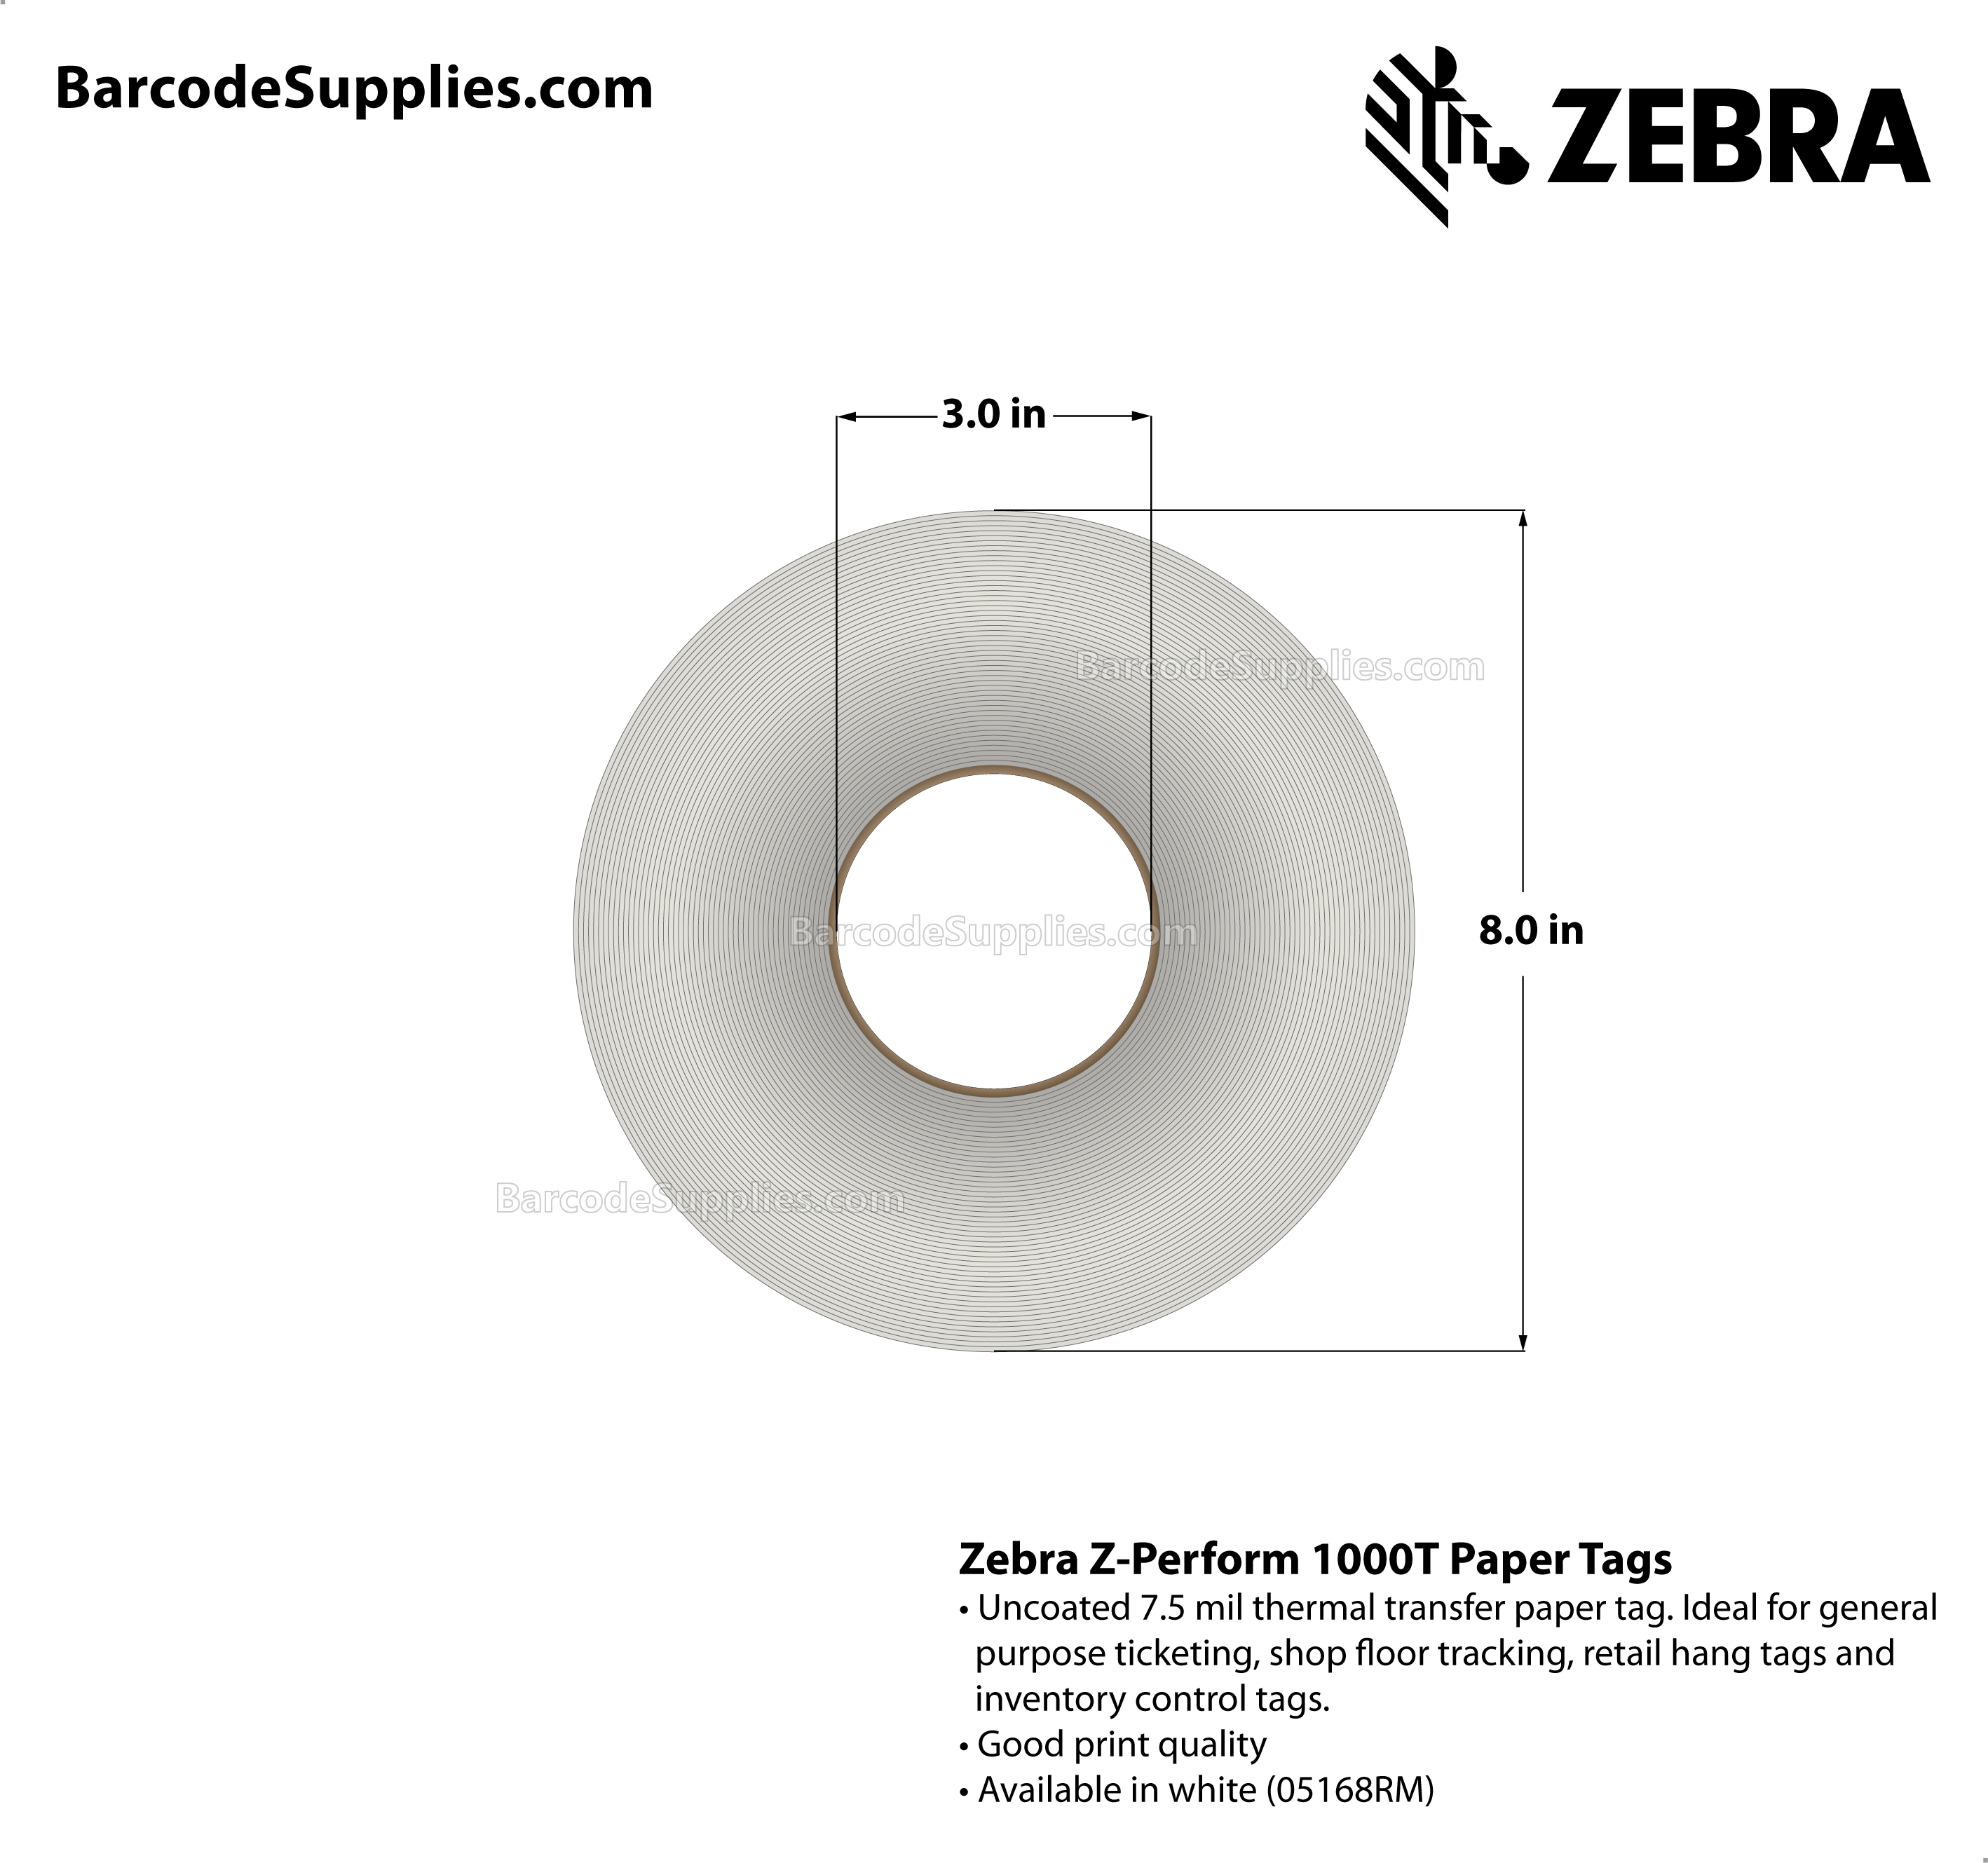 3 x 1.25 Thermal Transfer White Z-Perform 1000T 7.5 mil Tag Tags With No Adhesive - Contains side sensing notch - left-centered hole and right vertical perforation. - Perforated - 3750 Tags Per Roll - Carton Of 6 Rolls - 22500 Tags Total - MPN: 67251